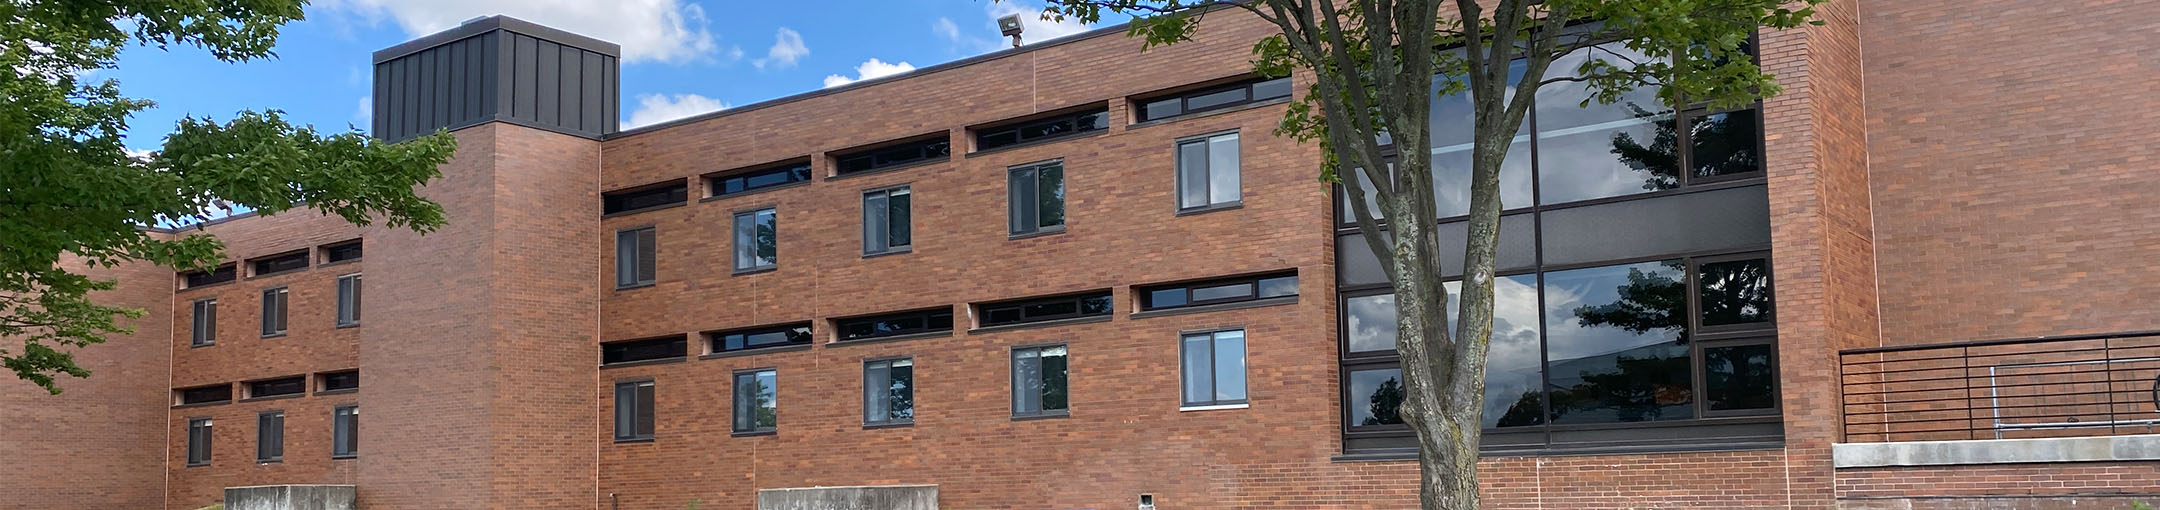 front of brick building, Residence Hall C